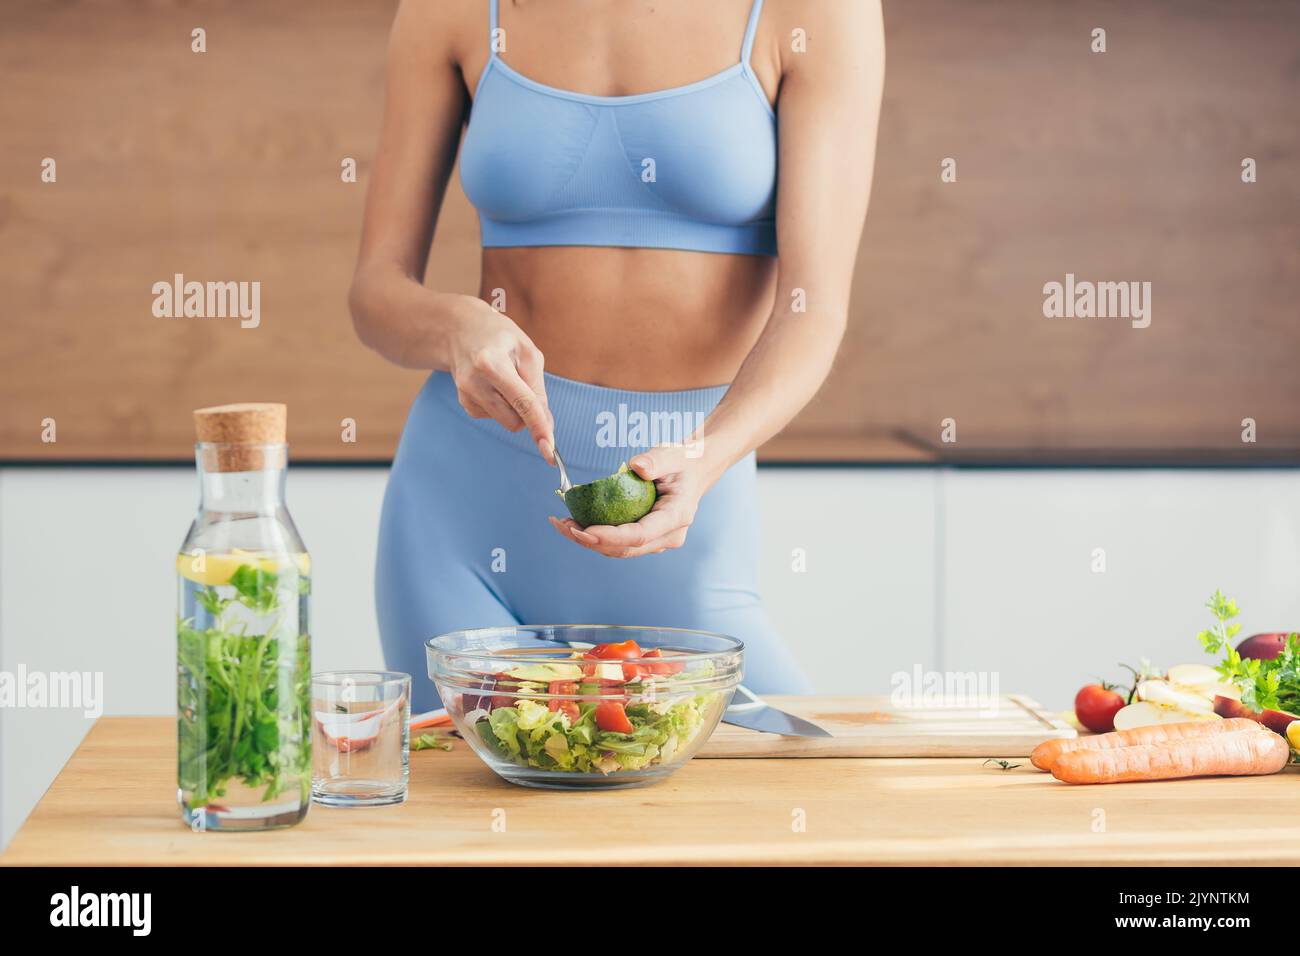 Close up photo, body part, hands of young fitness woman making salad with fresh vegetables and fresh detox eap in kitchen at home Stock Photo